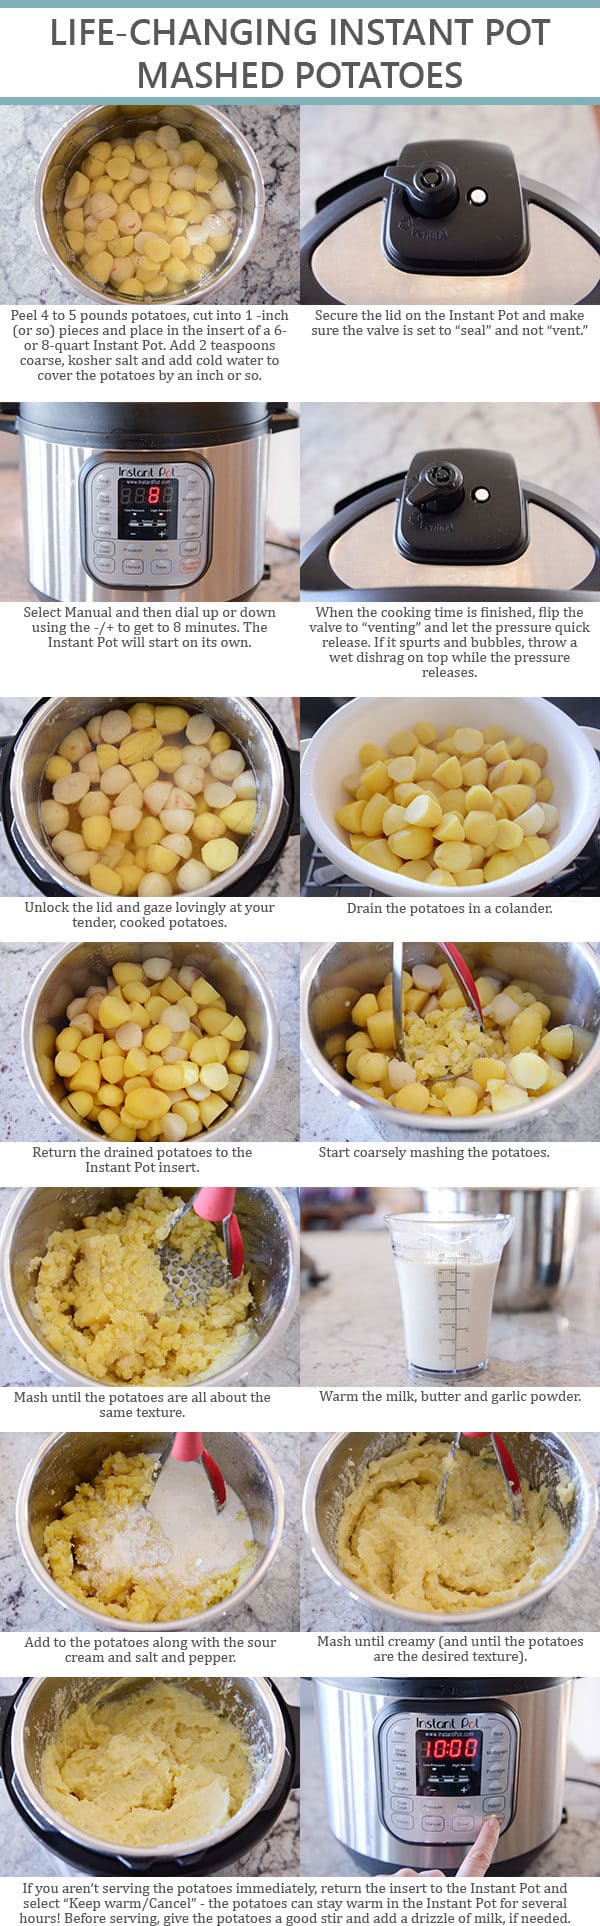 Step-by-step pictures and text for how to make Instant Pot Mashed Potatoes.